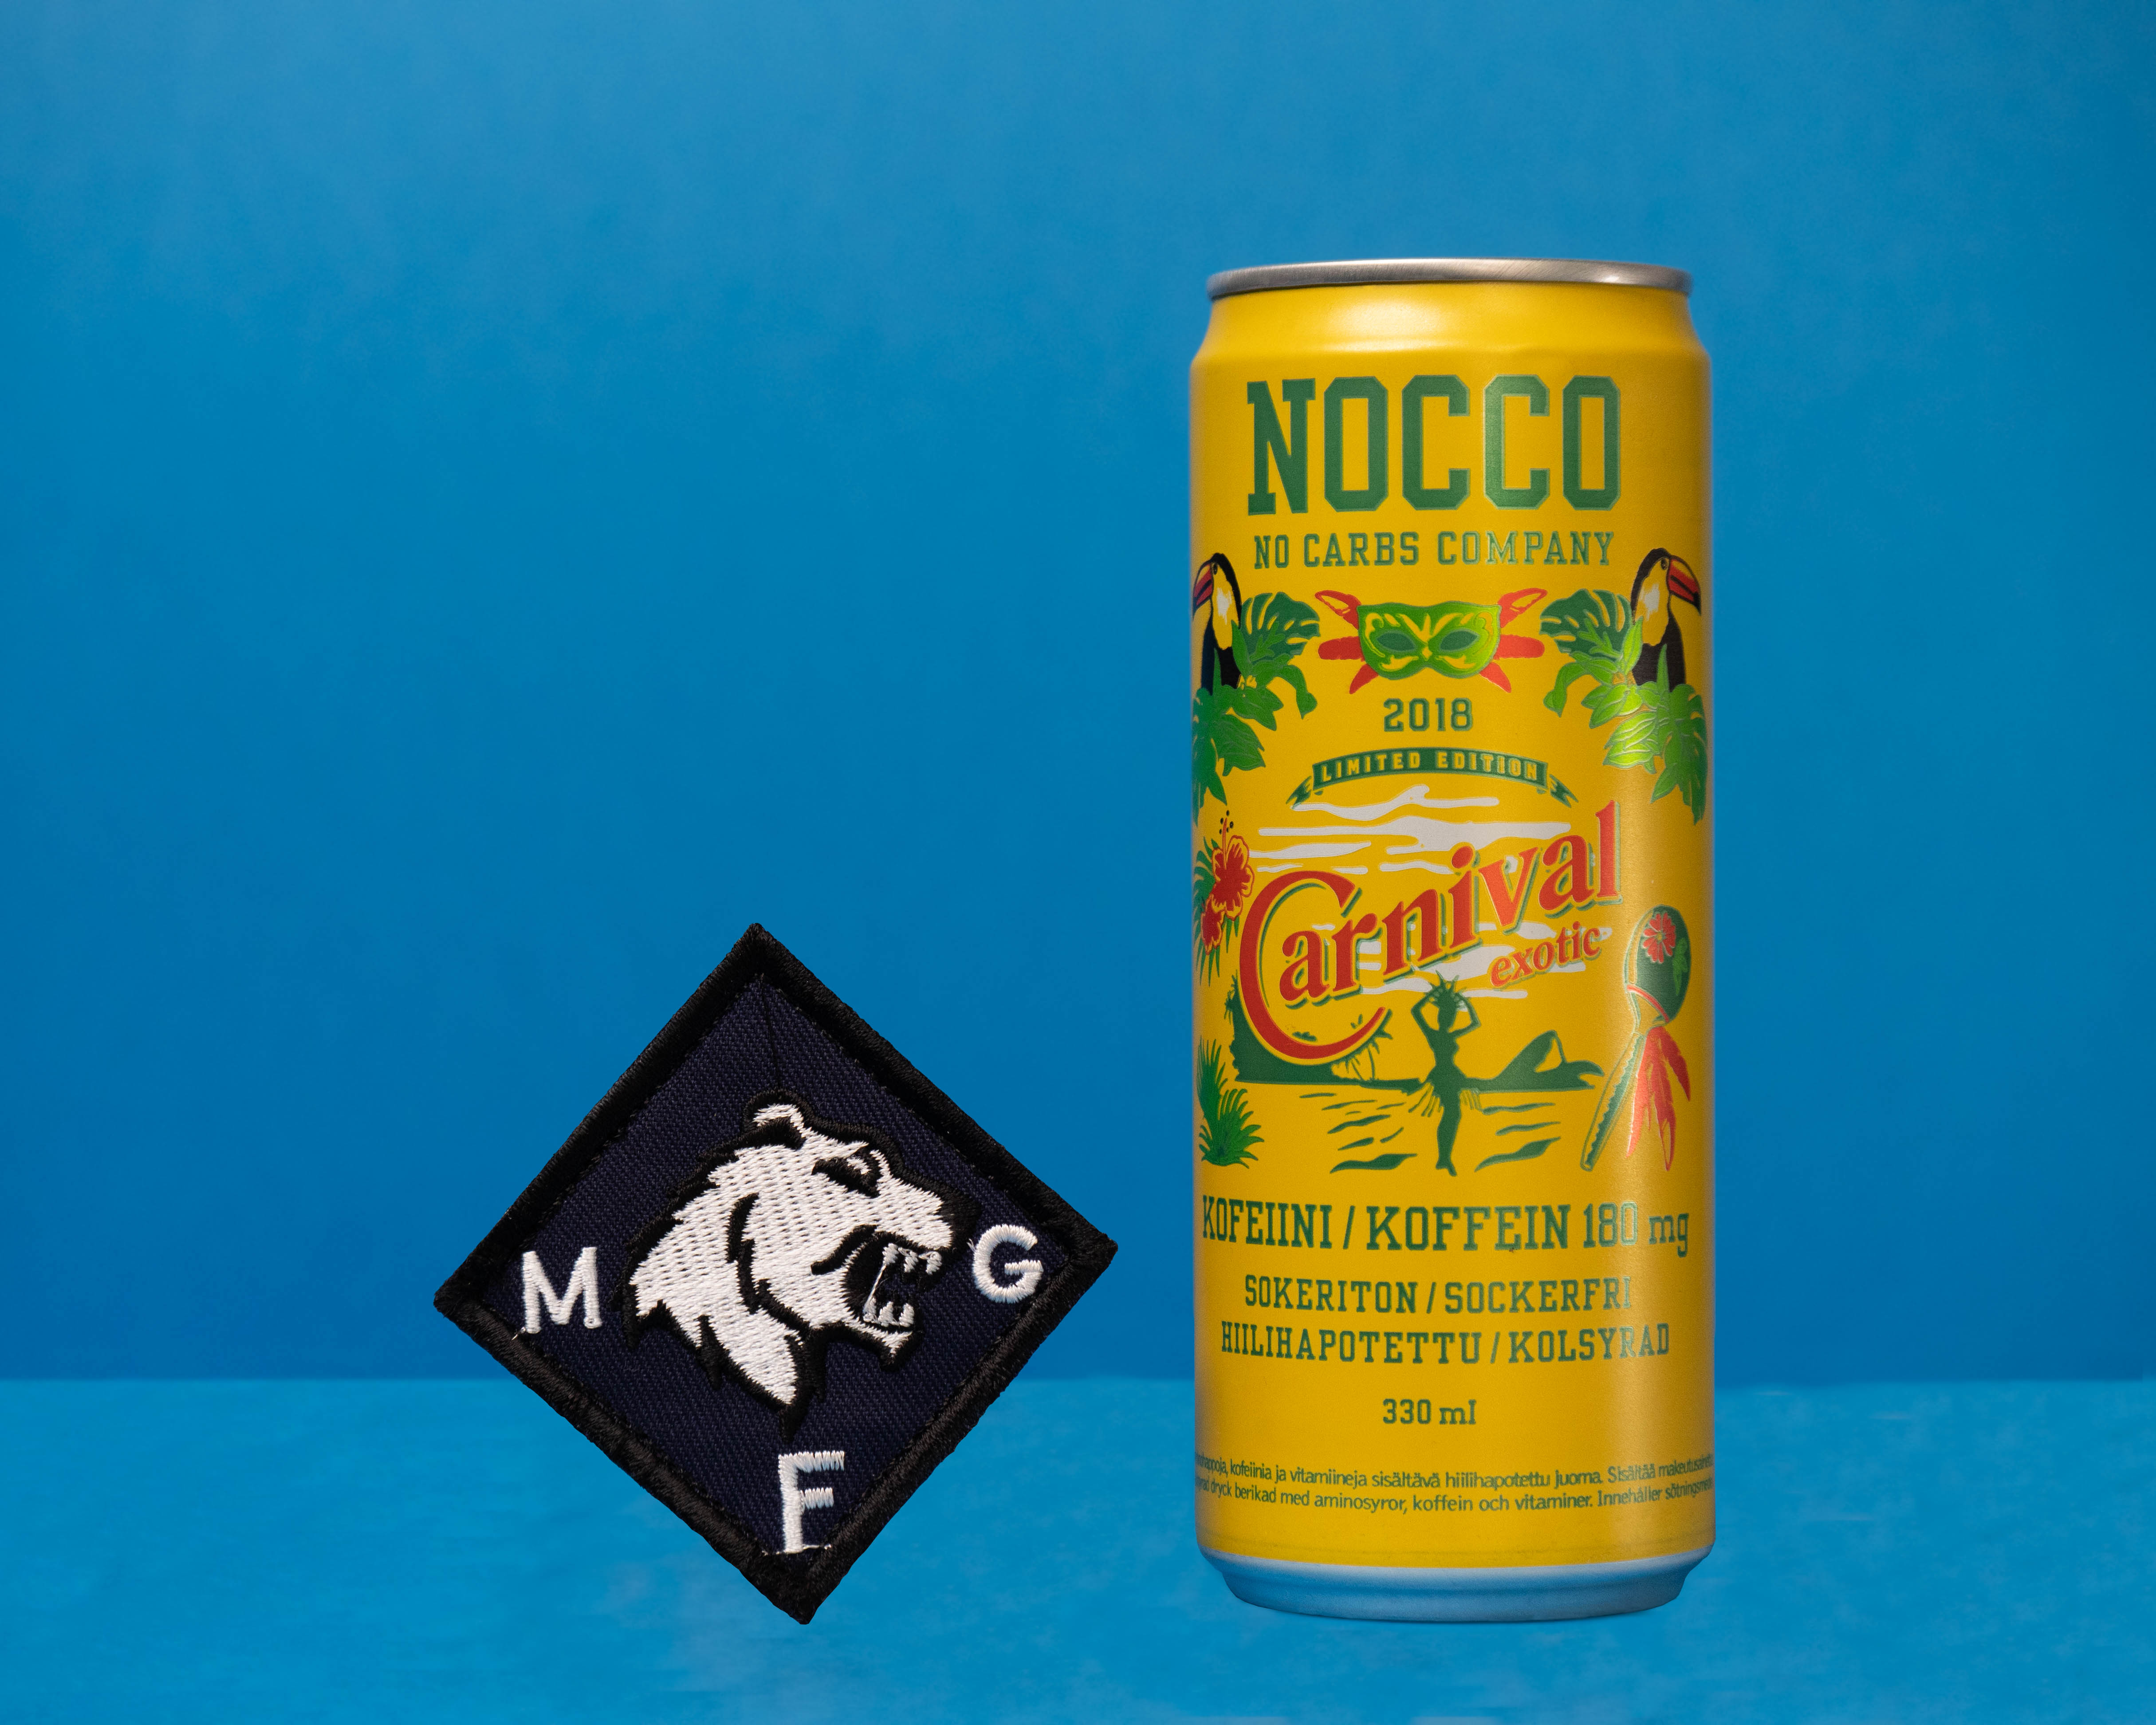 Nocco Summer edition can and a mgf military group finland patch